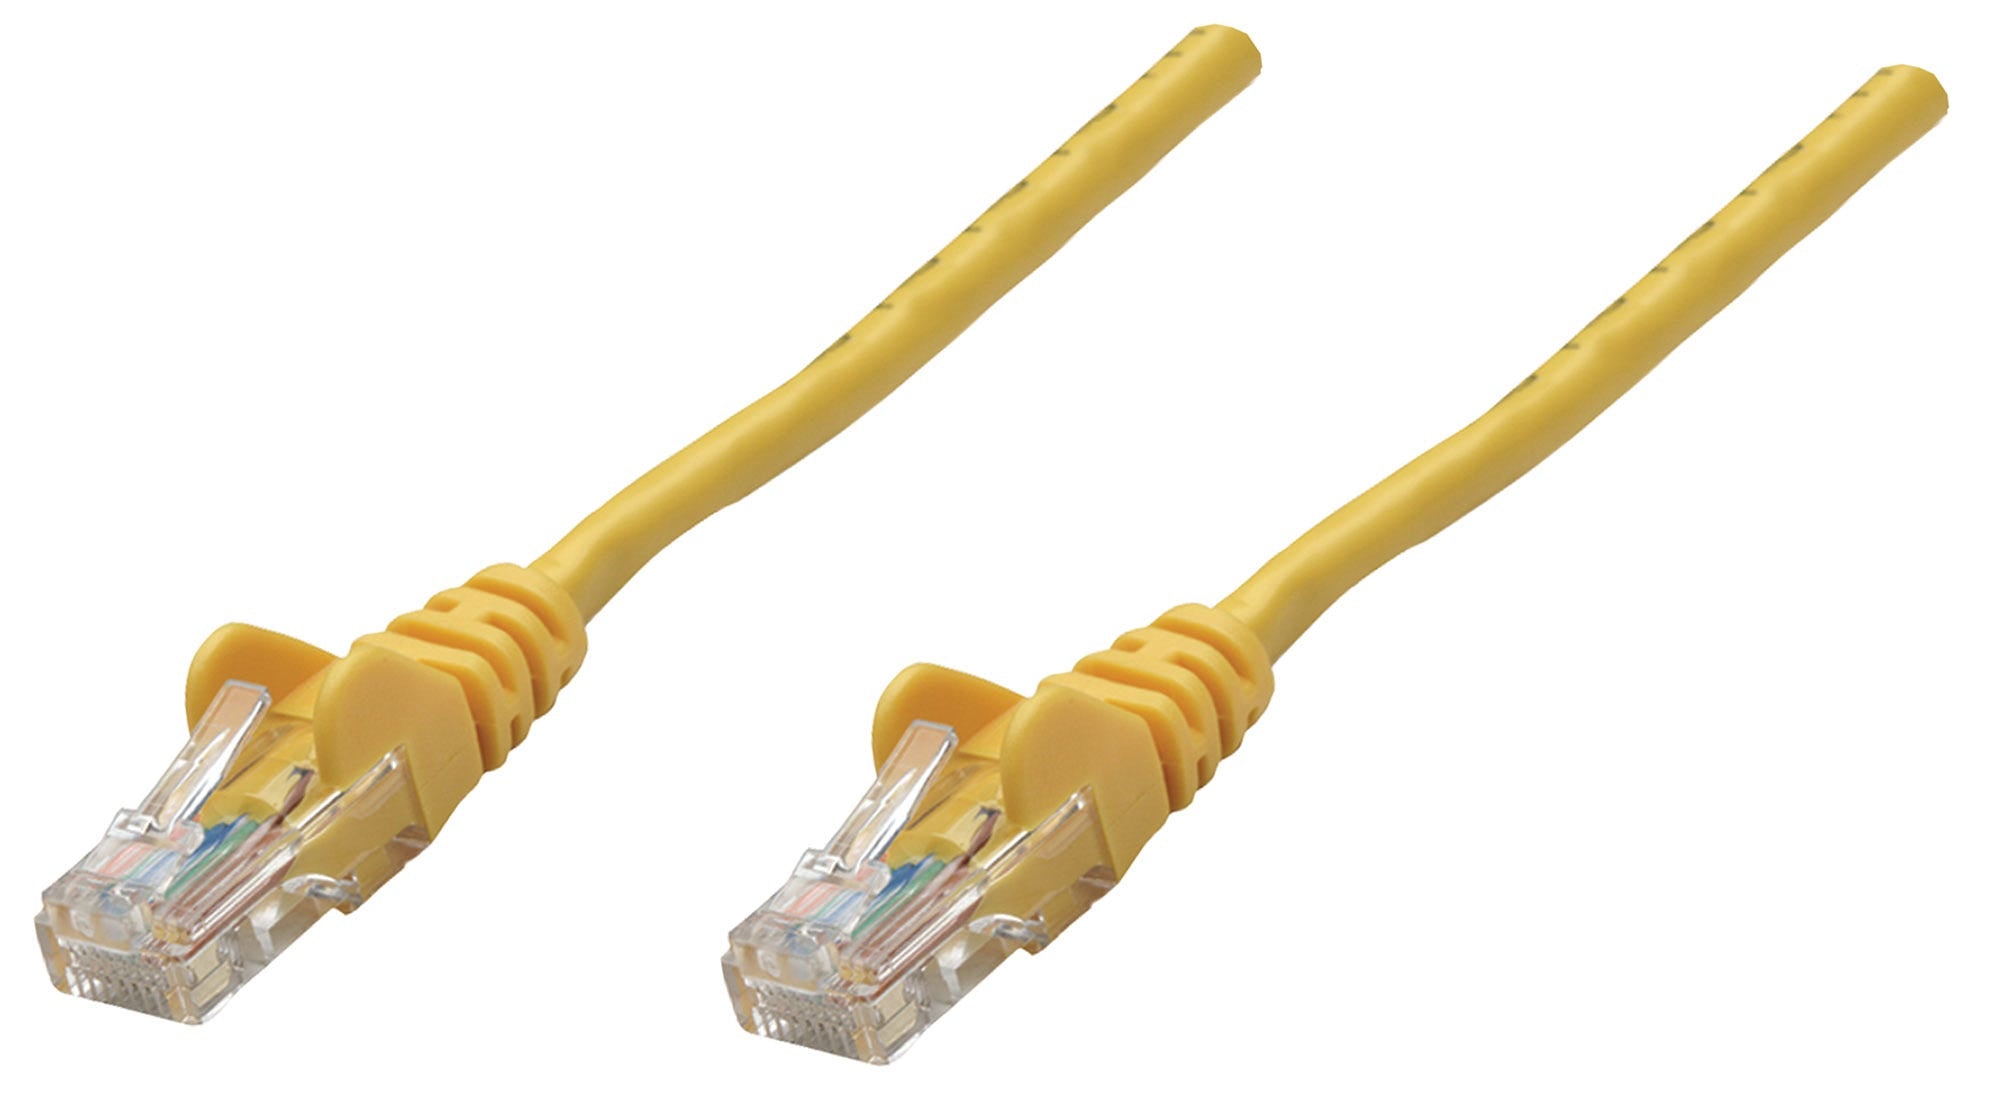 Intellinet Network Patch Cable, Cat6, 0.25m, Yellow, CCA, U/UTP, PVC, RJ45, Gold Plated Contacts, Snagless, Booted, Lifetime Warranty, Polybag